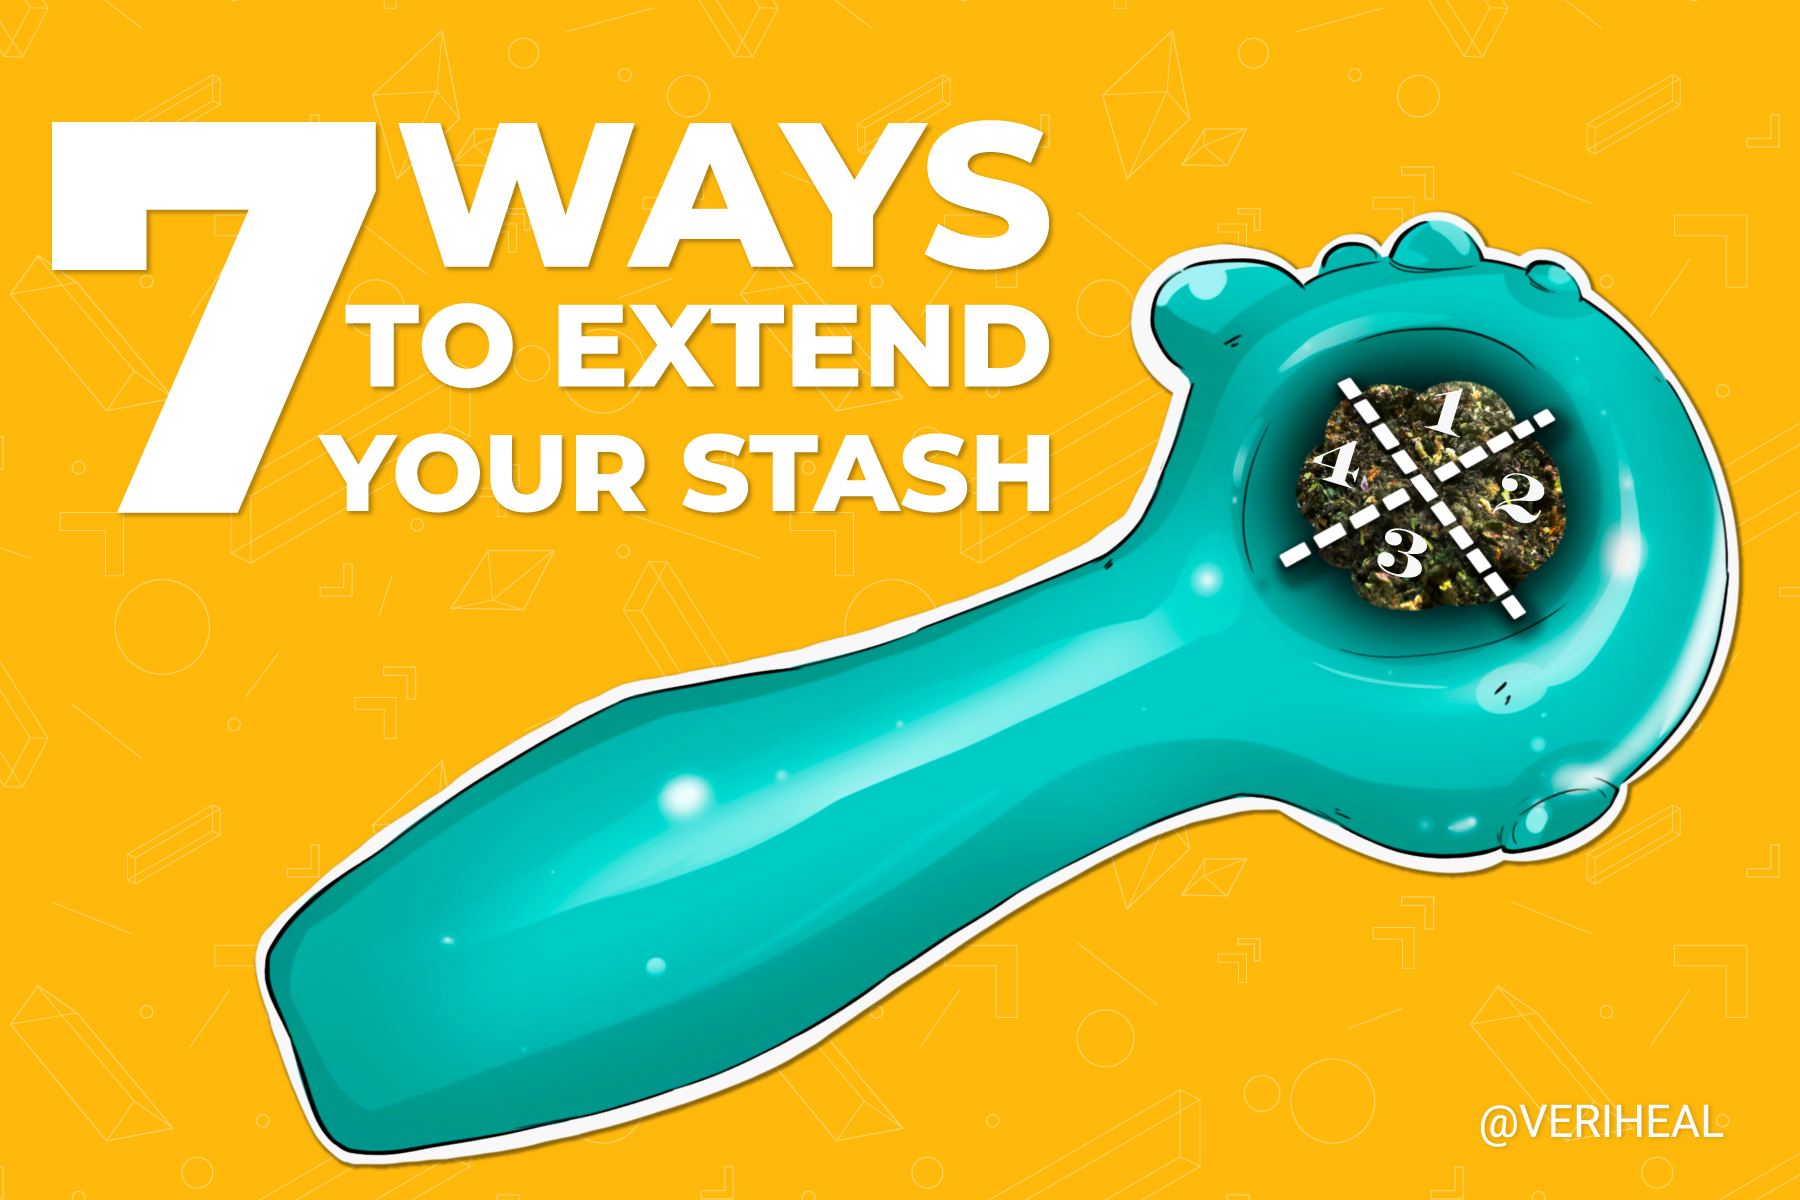 7 Ways to Extend Your Stash When the Price of Cannabis is Sky High